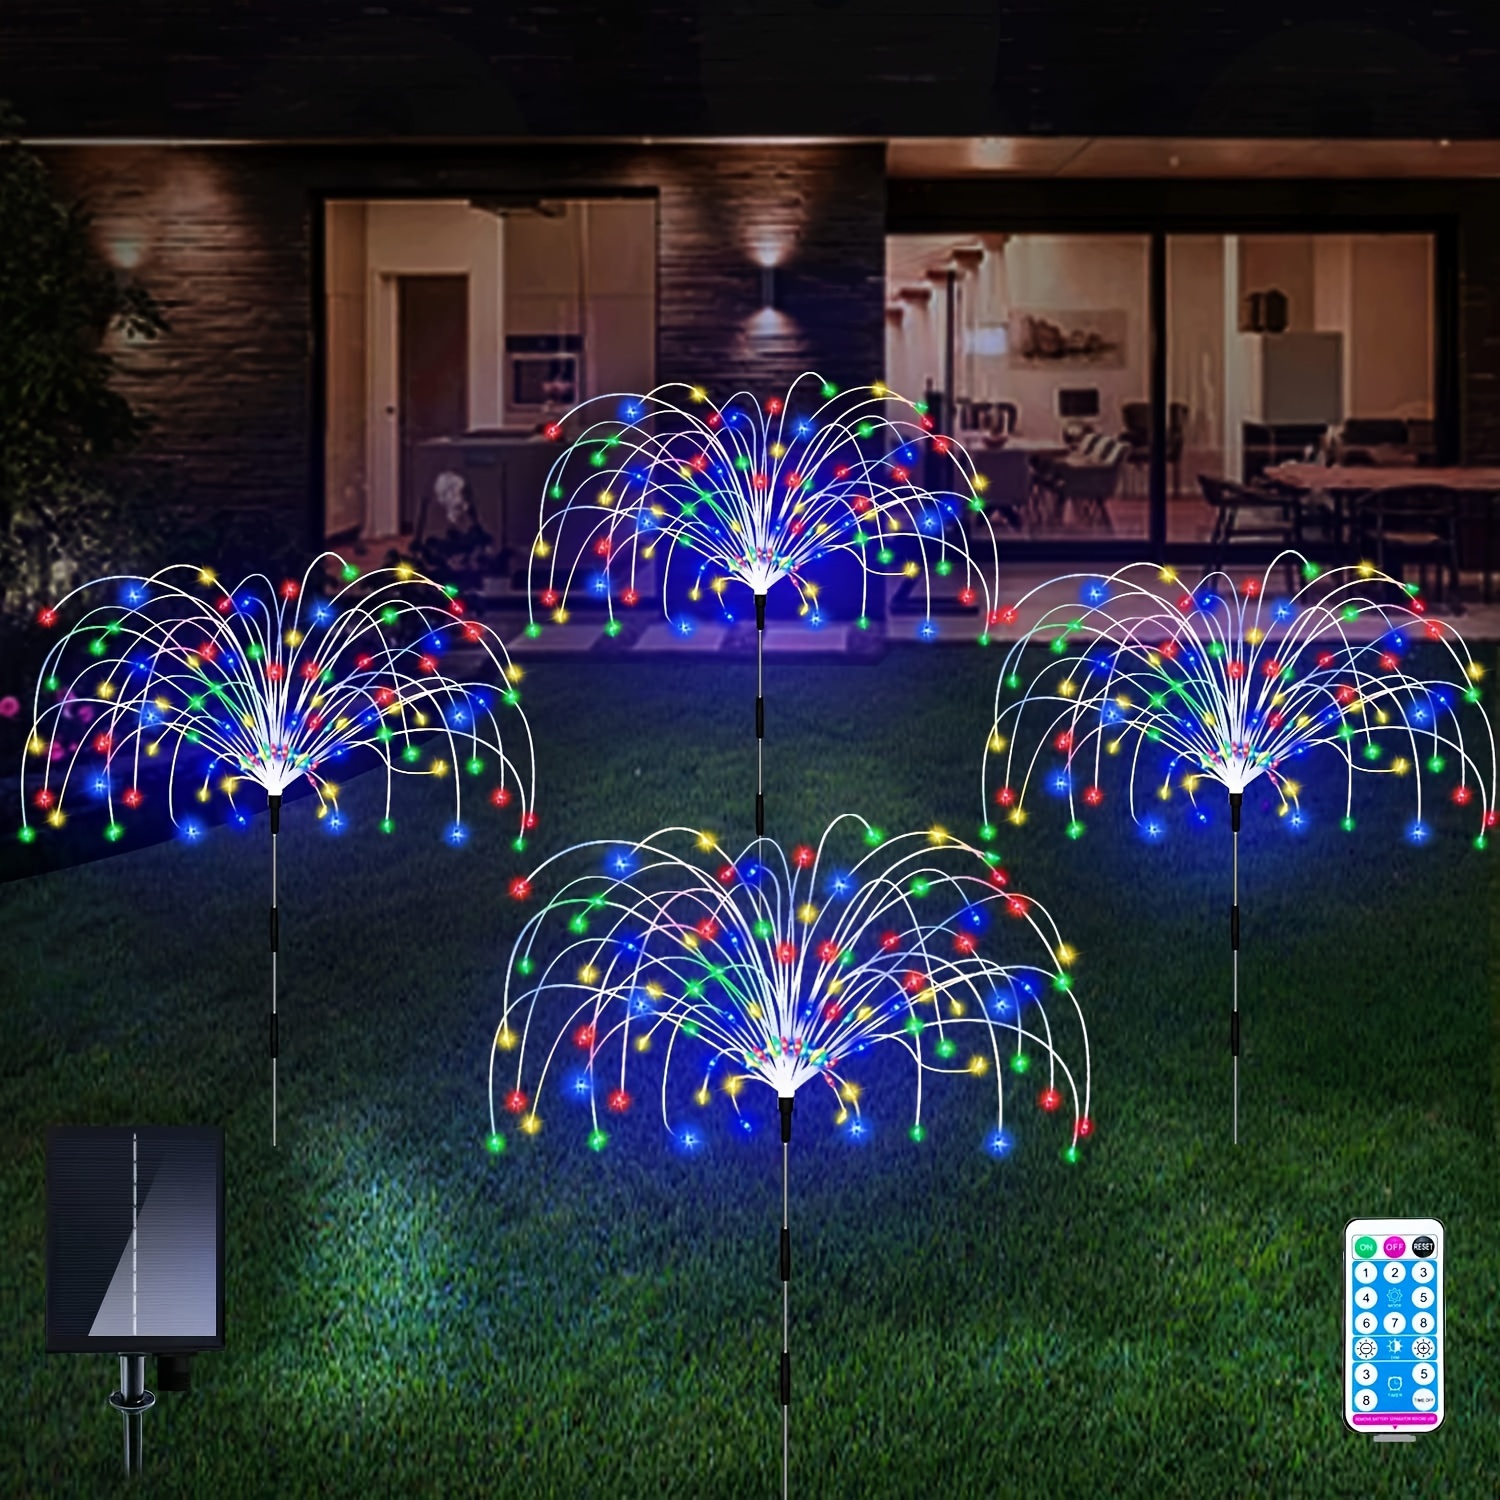 

Solar Garden Fairy Lights 4 Pack 120 Led 30 Copper Wire Outdoor Firework Landscape Path String Lights Waterproof 8 Lighting Modes Remote Control For Backyard Christmas Party Decorative